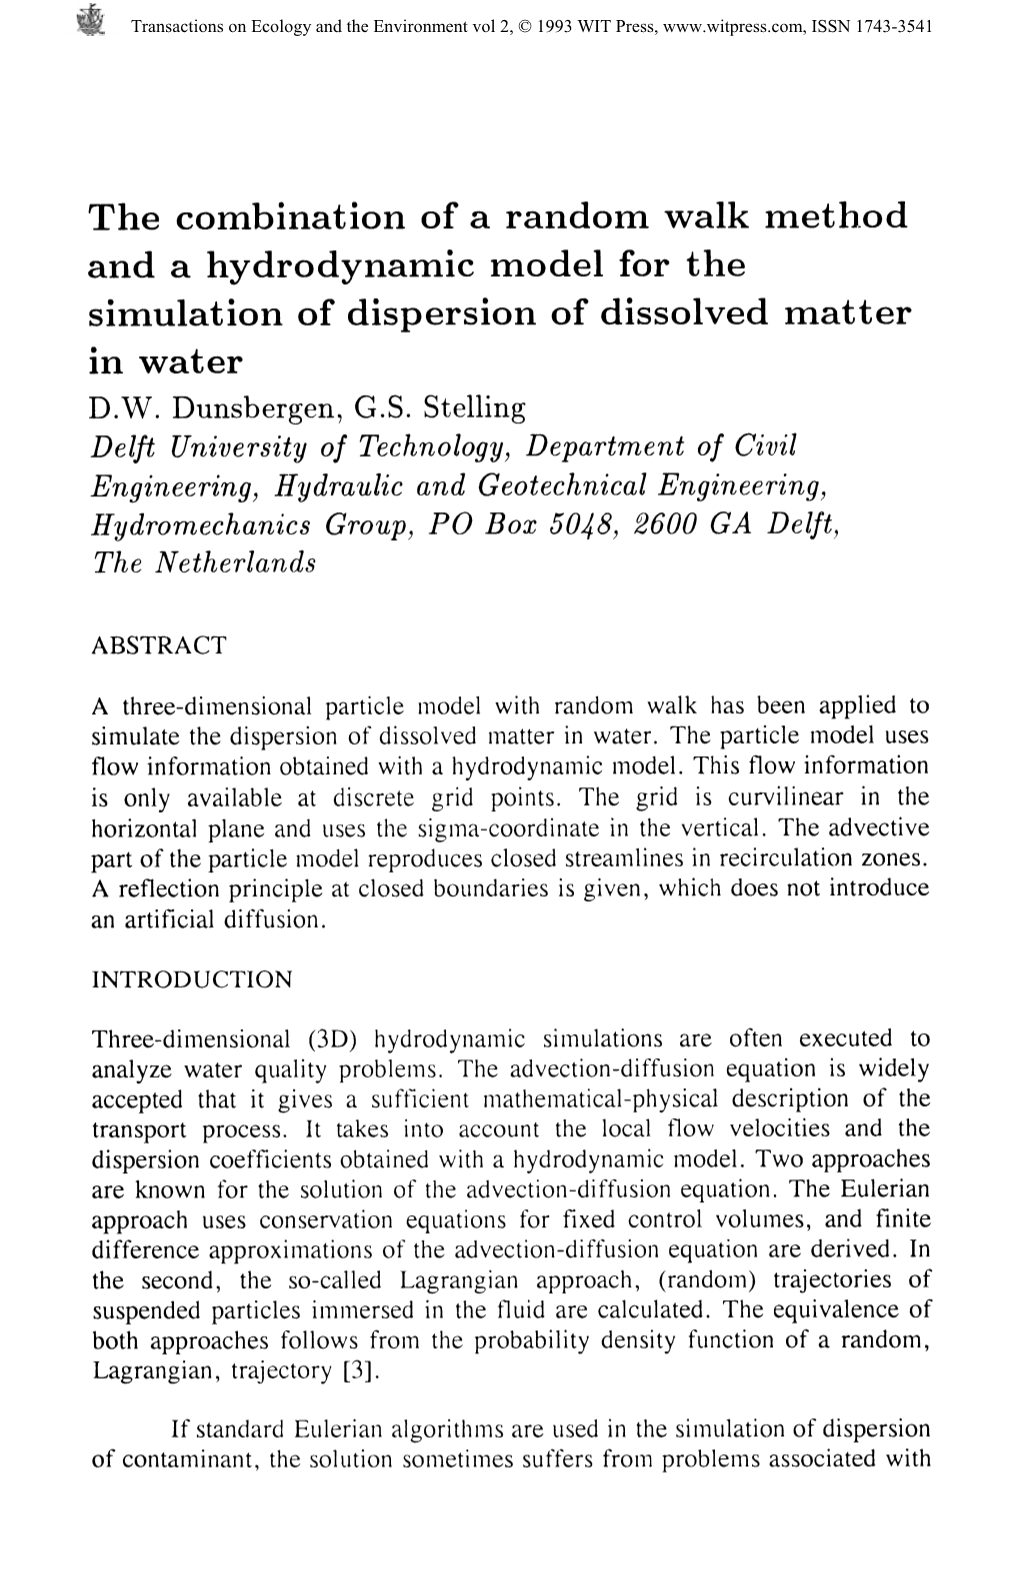 The Combination of a Random Walk Method and a Hydrodynamic Model for the Simulation of Dispersion of Dissolved Matter in Water